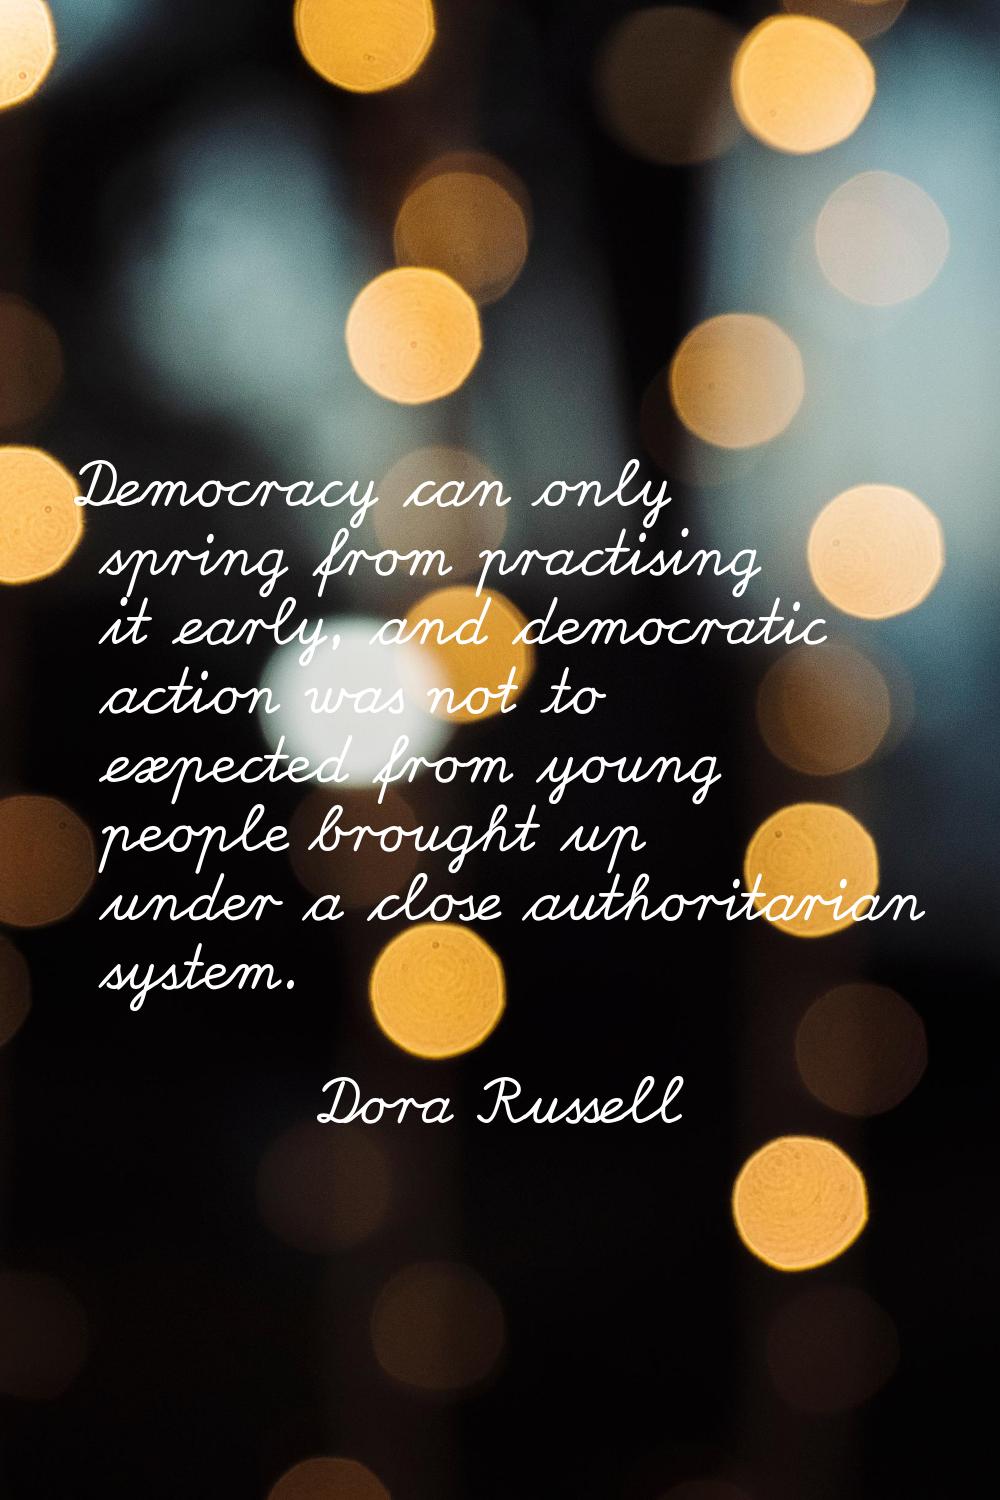 Democracy can only spring from practising it early, and democratic action was not to expected from 